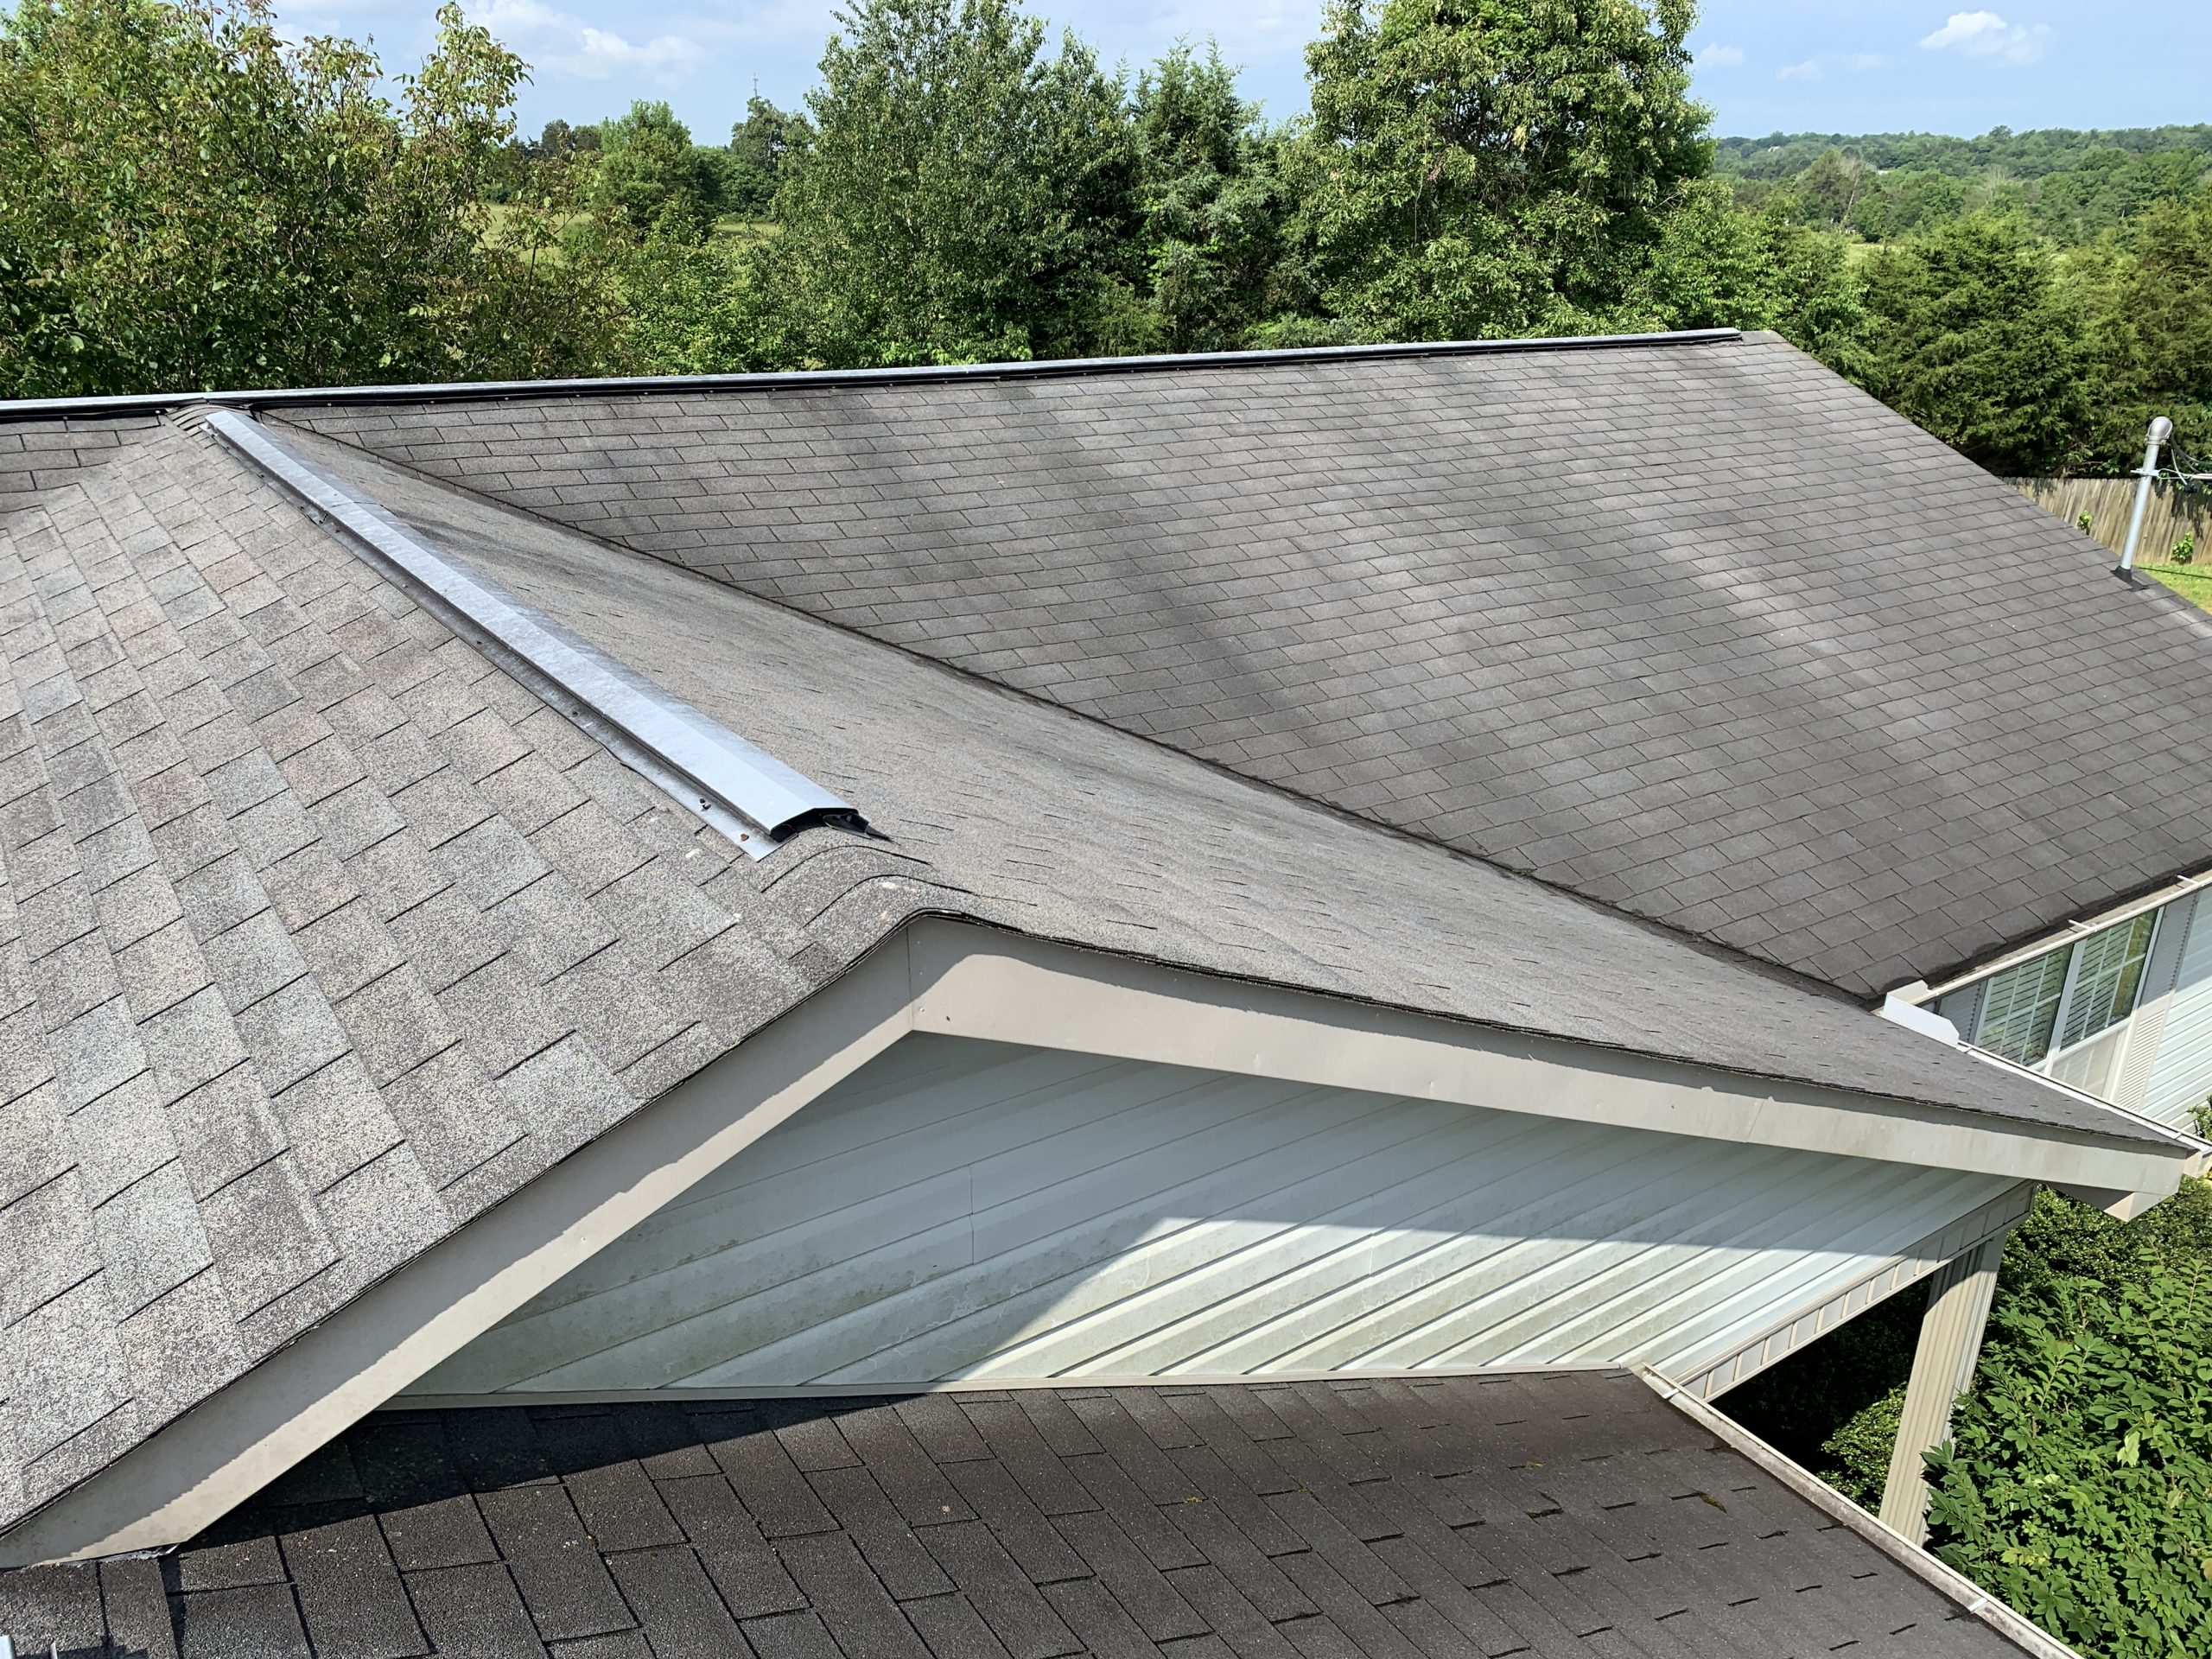 This is the view of the roof with gray shingles showing the ridge of the roof.  